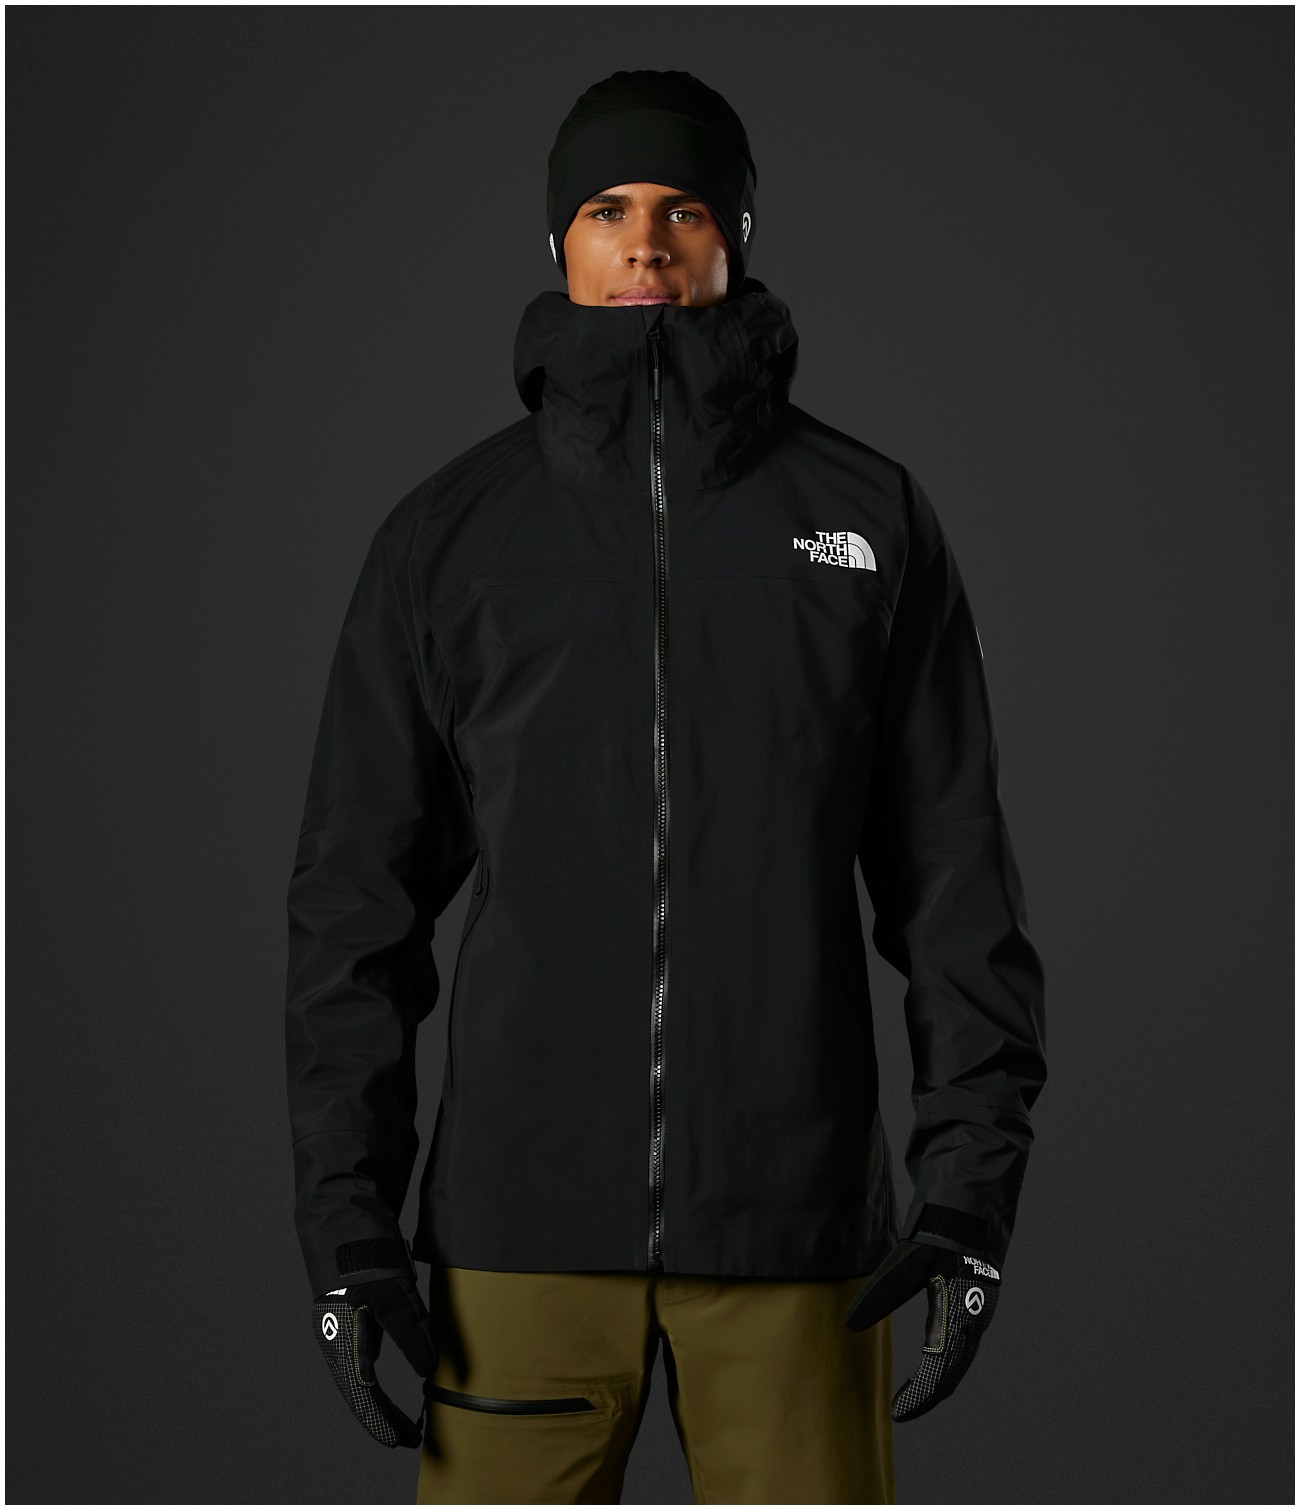 fusionere lampe Polar Men's Summit Series Jackets & Gear | The North Face